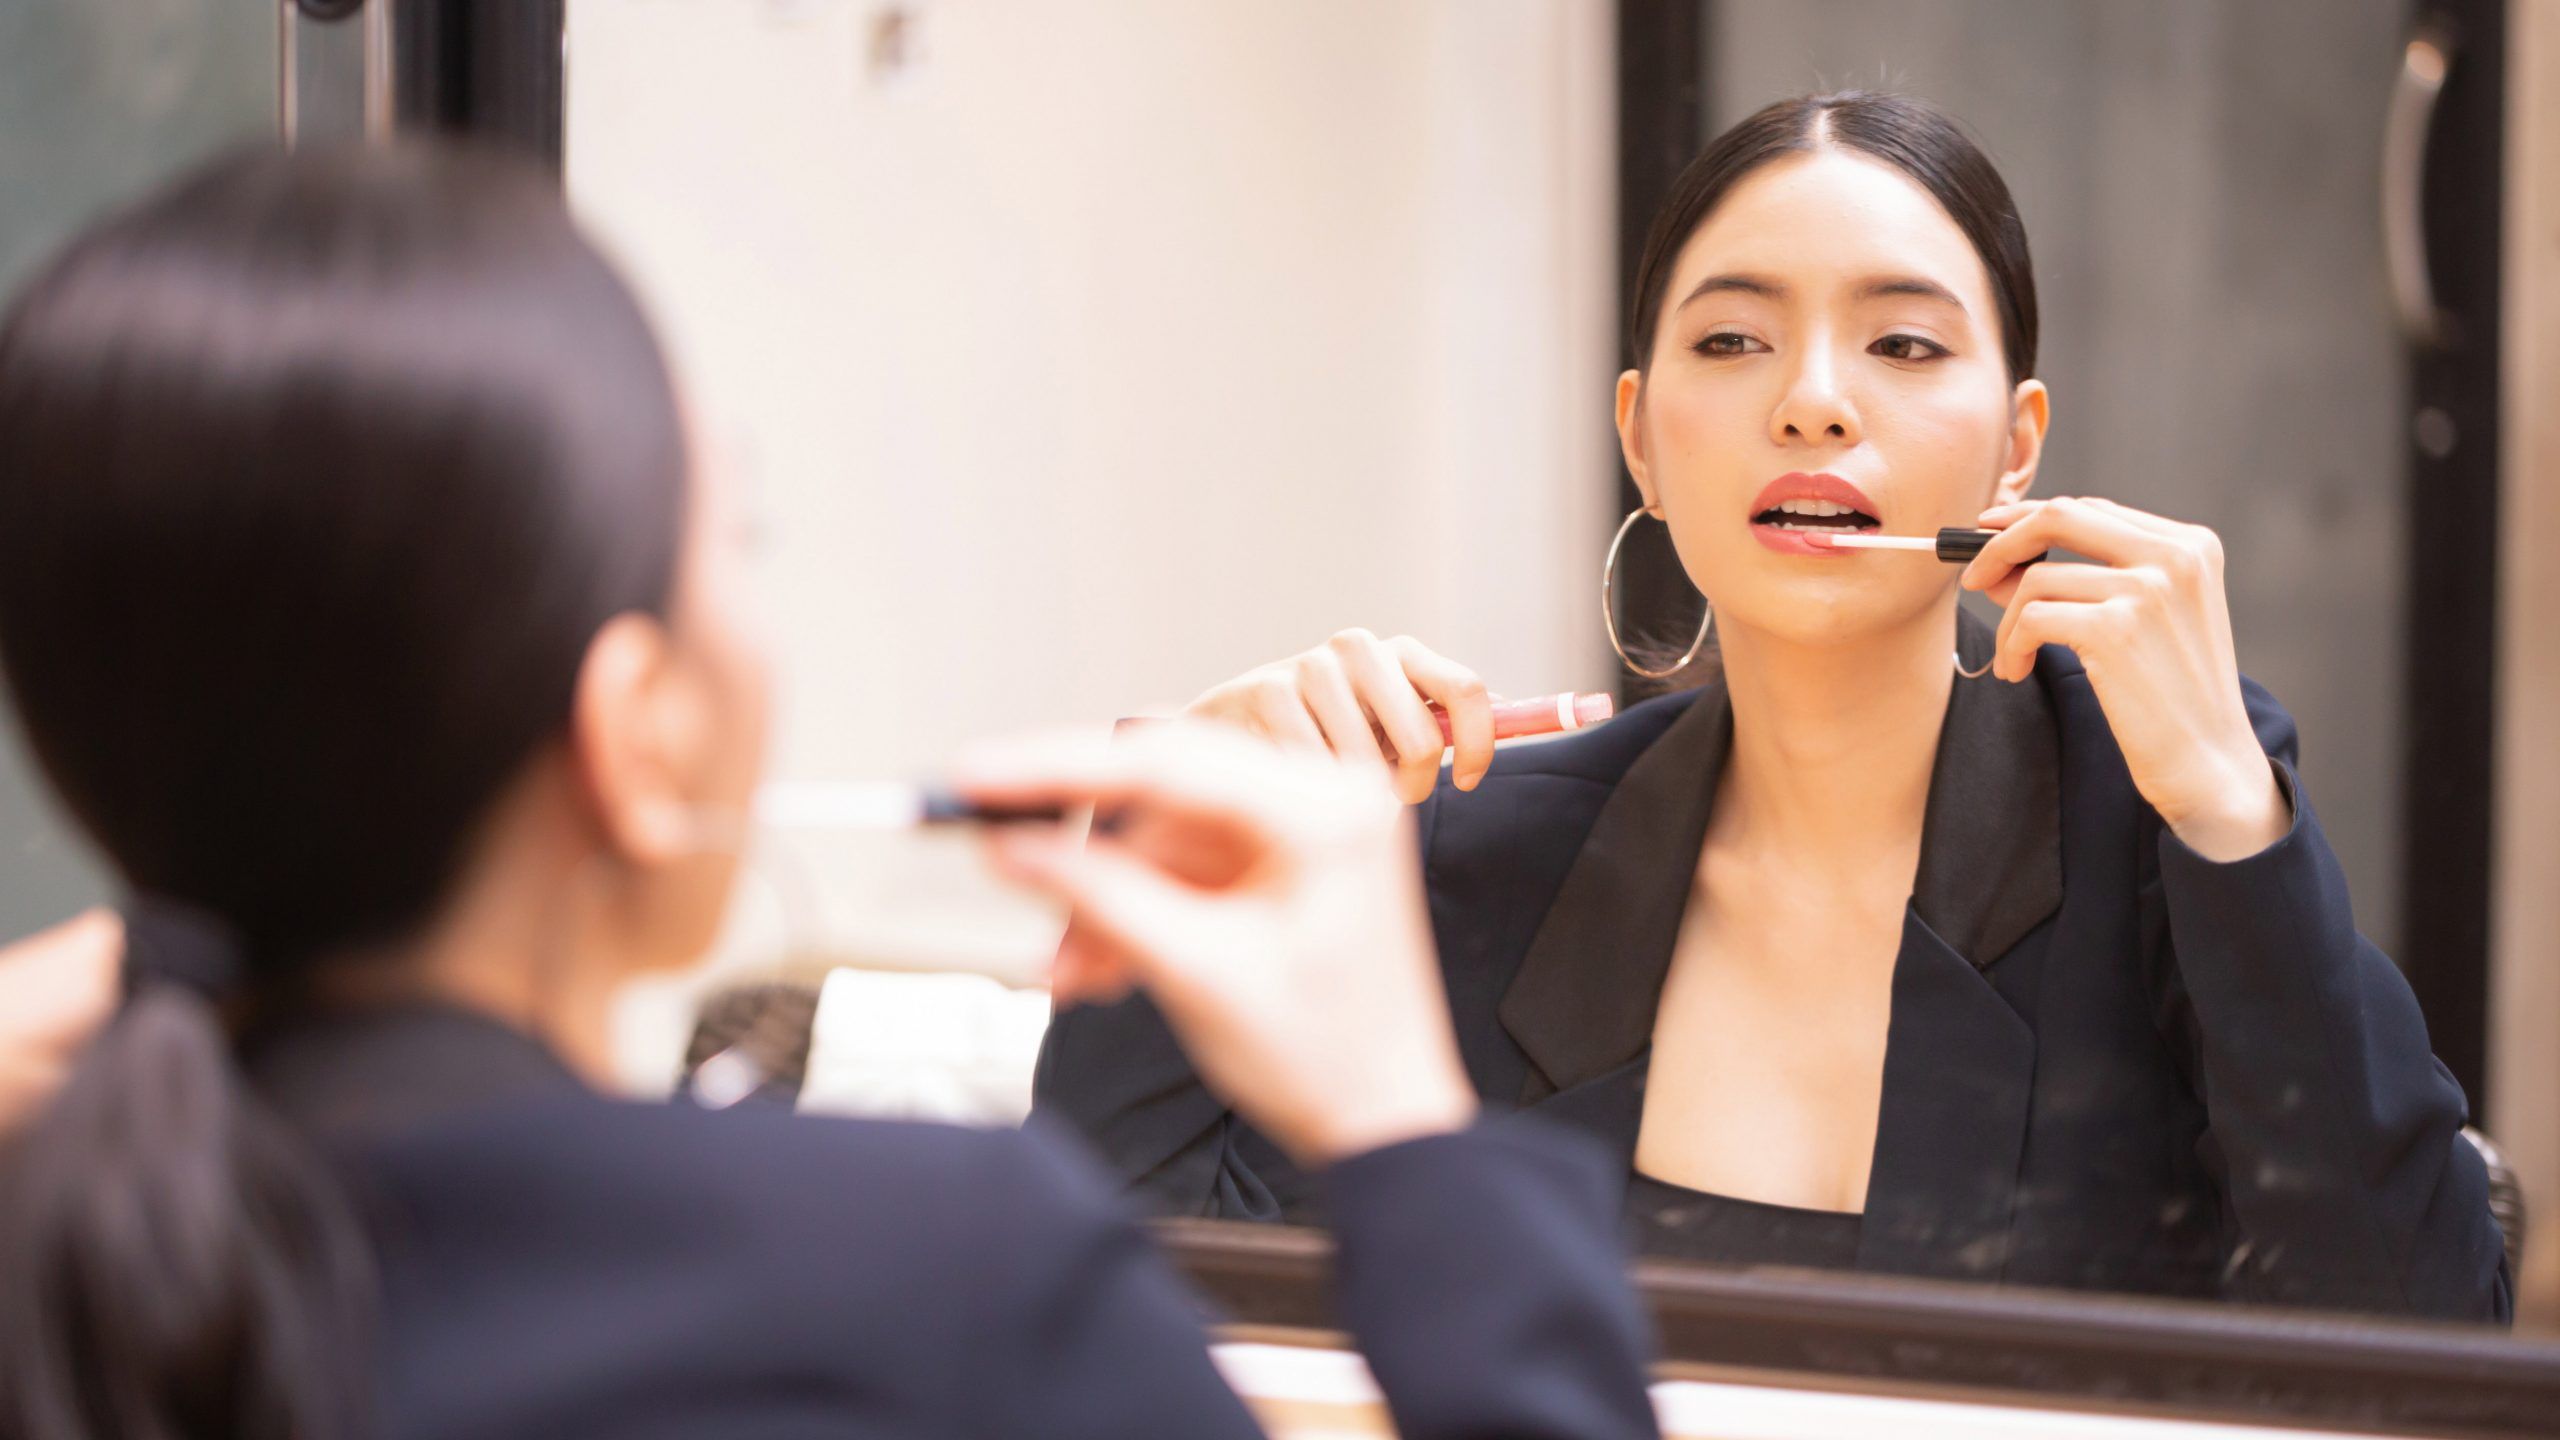 These young Chinese women are ditching make-up as they reject